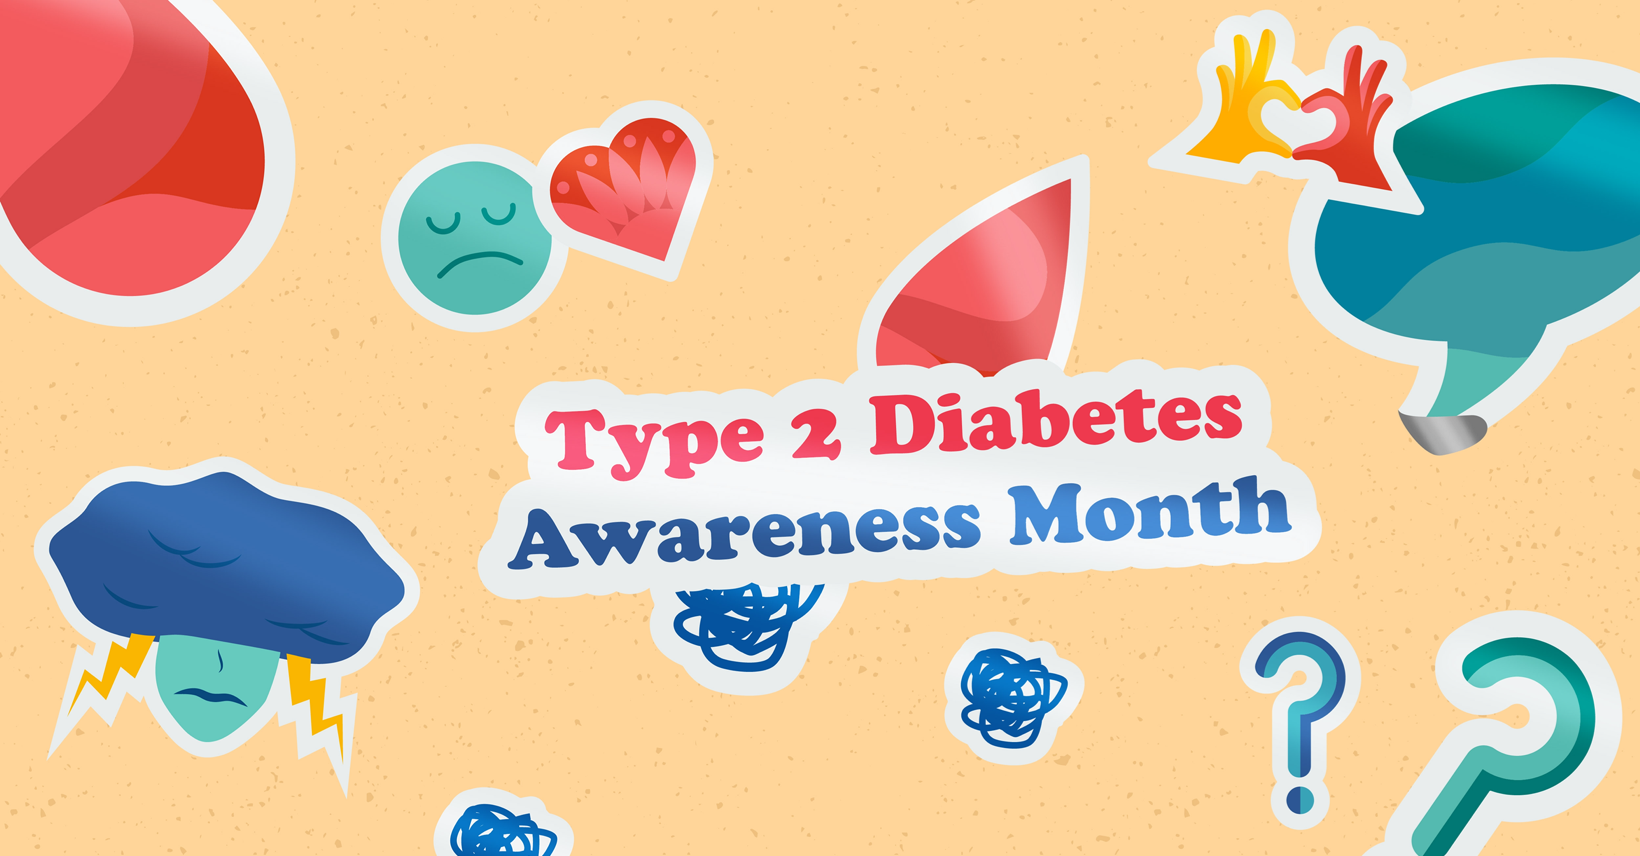 Stickers representing different emotions for type 2 diabetes awareness month